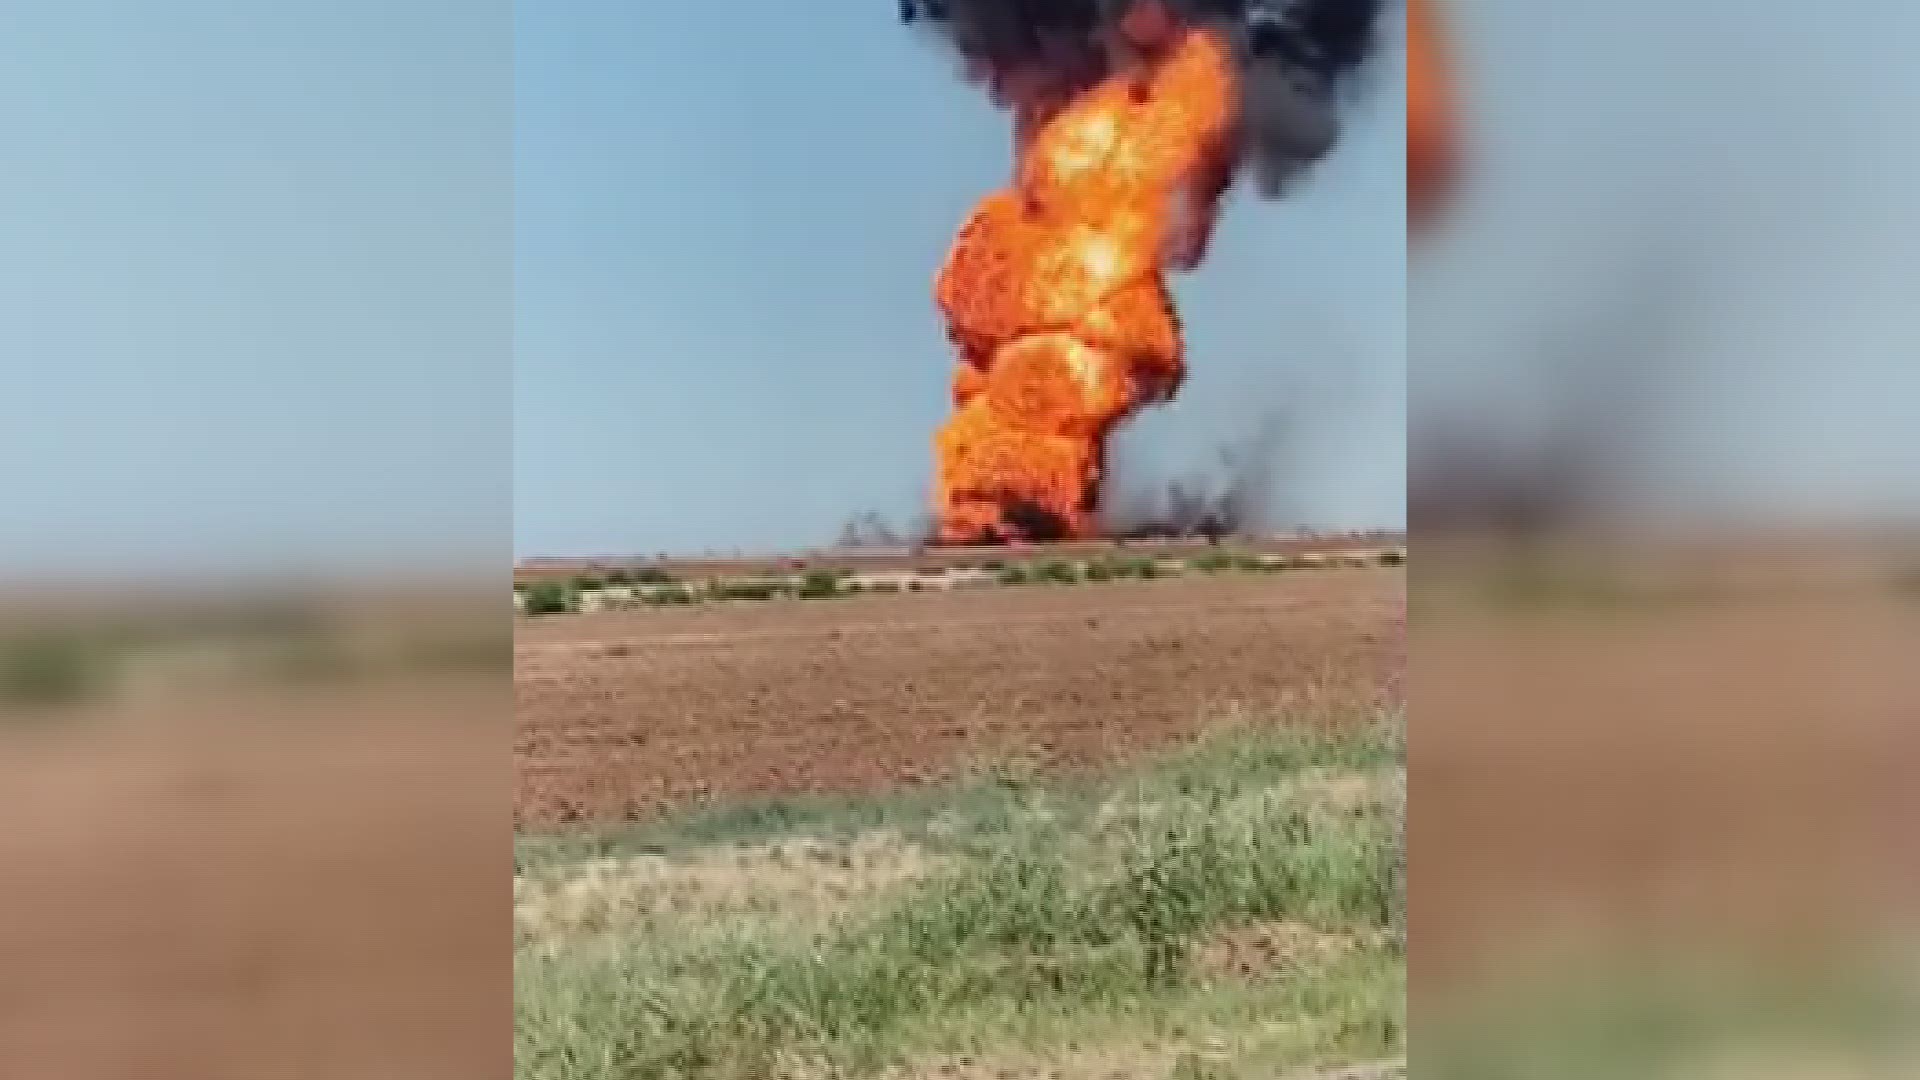 Video sent to NewsWest 9 of the Martin County explosion, courtesy Carlos Montaño